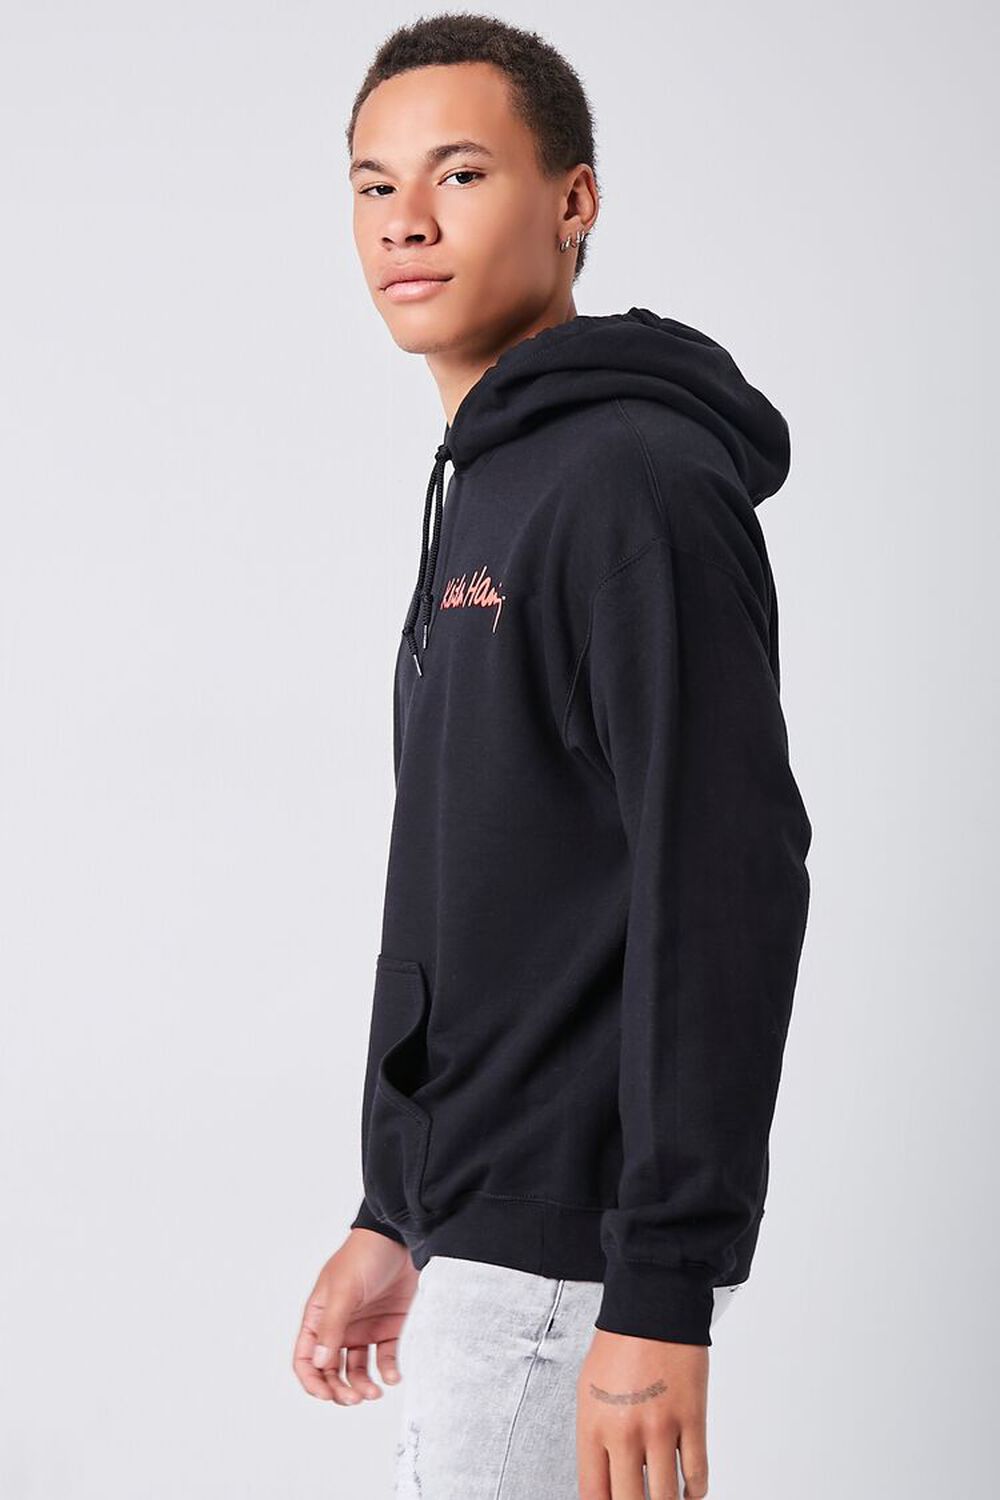 BLACK/RED Keith Haring Graphic Hoodie, image 2